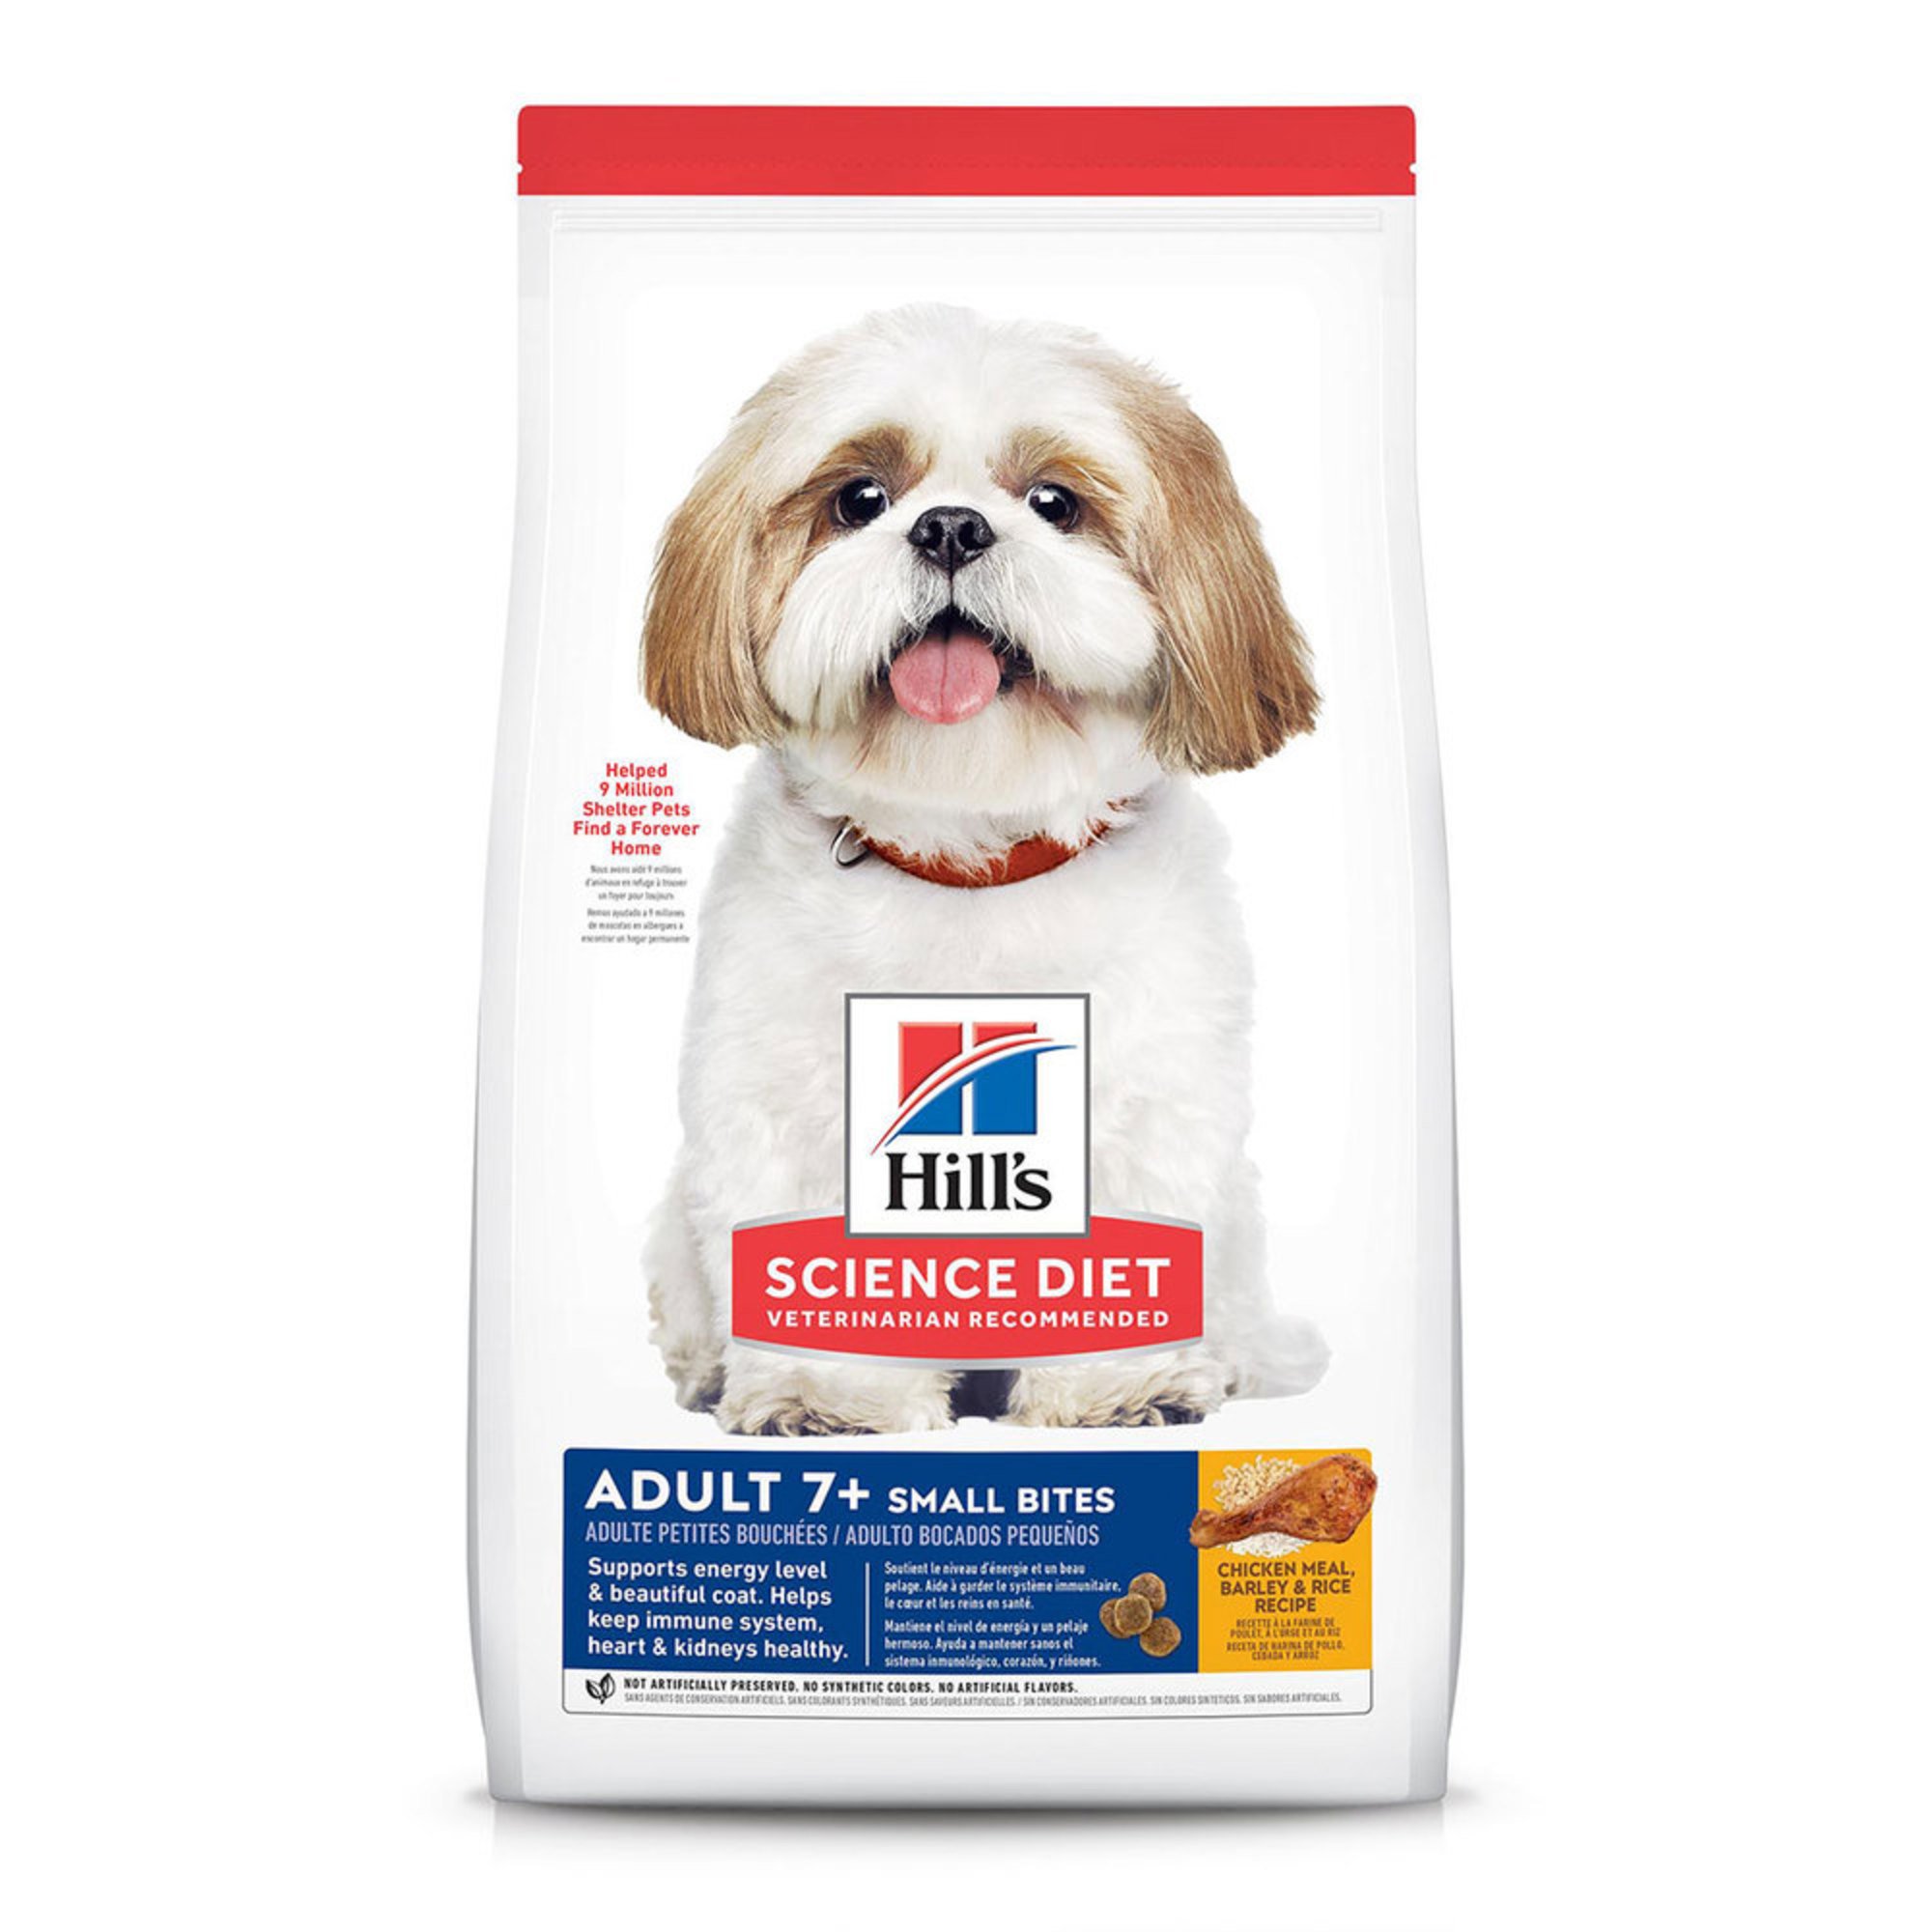 hill-s-science-diet-canine-adult-7-small-bites-chicken-dog-food-dog